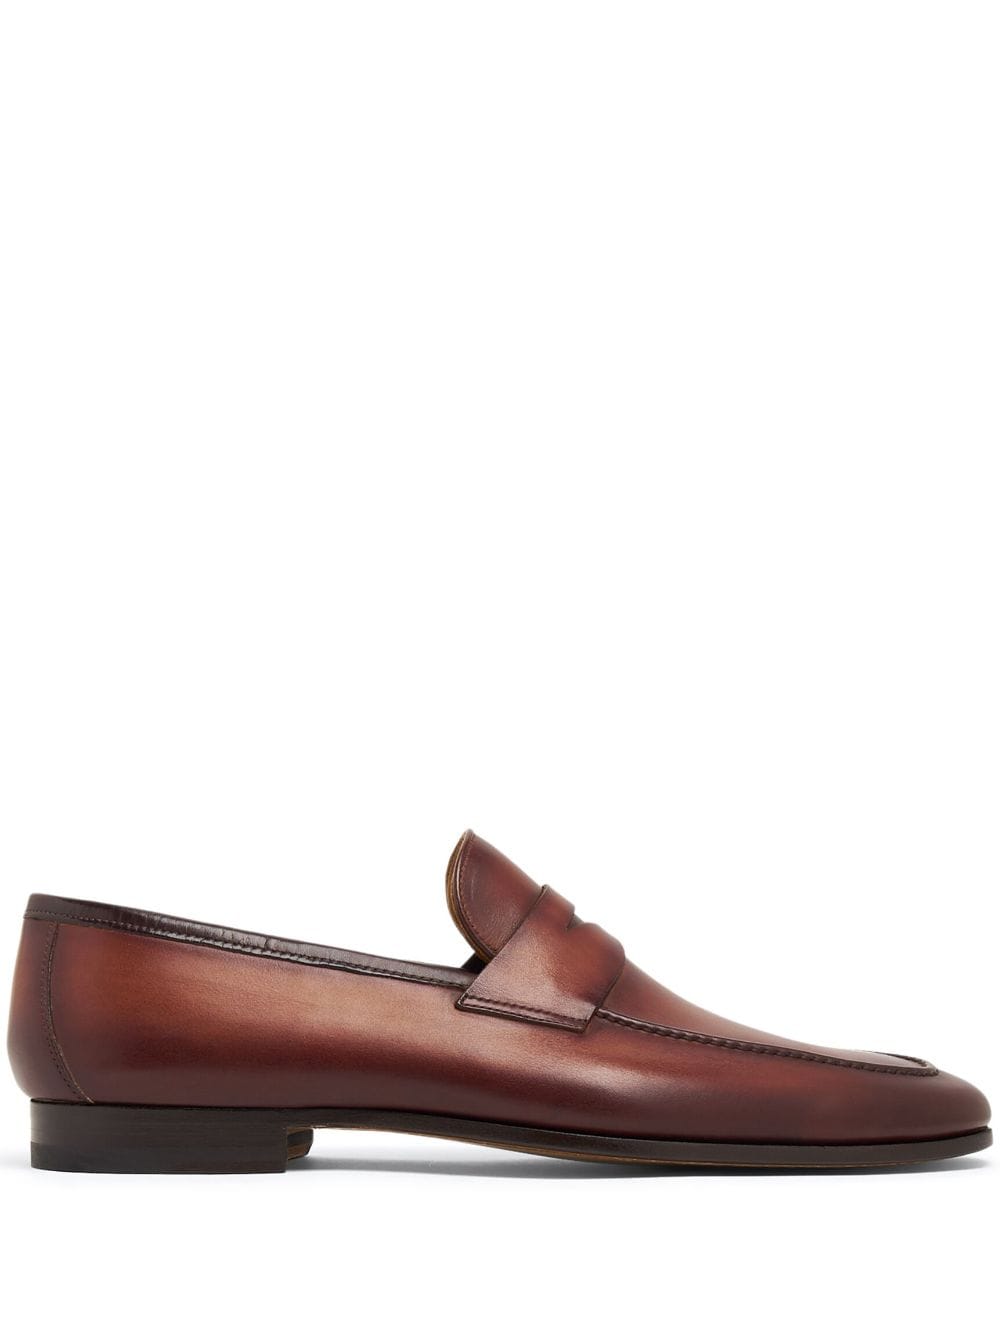 Magnanni leather slip-on Penny loafers - Brown von Magnanni